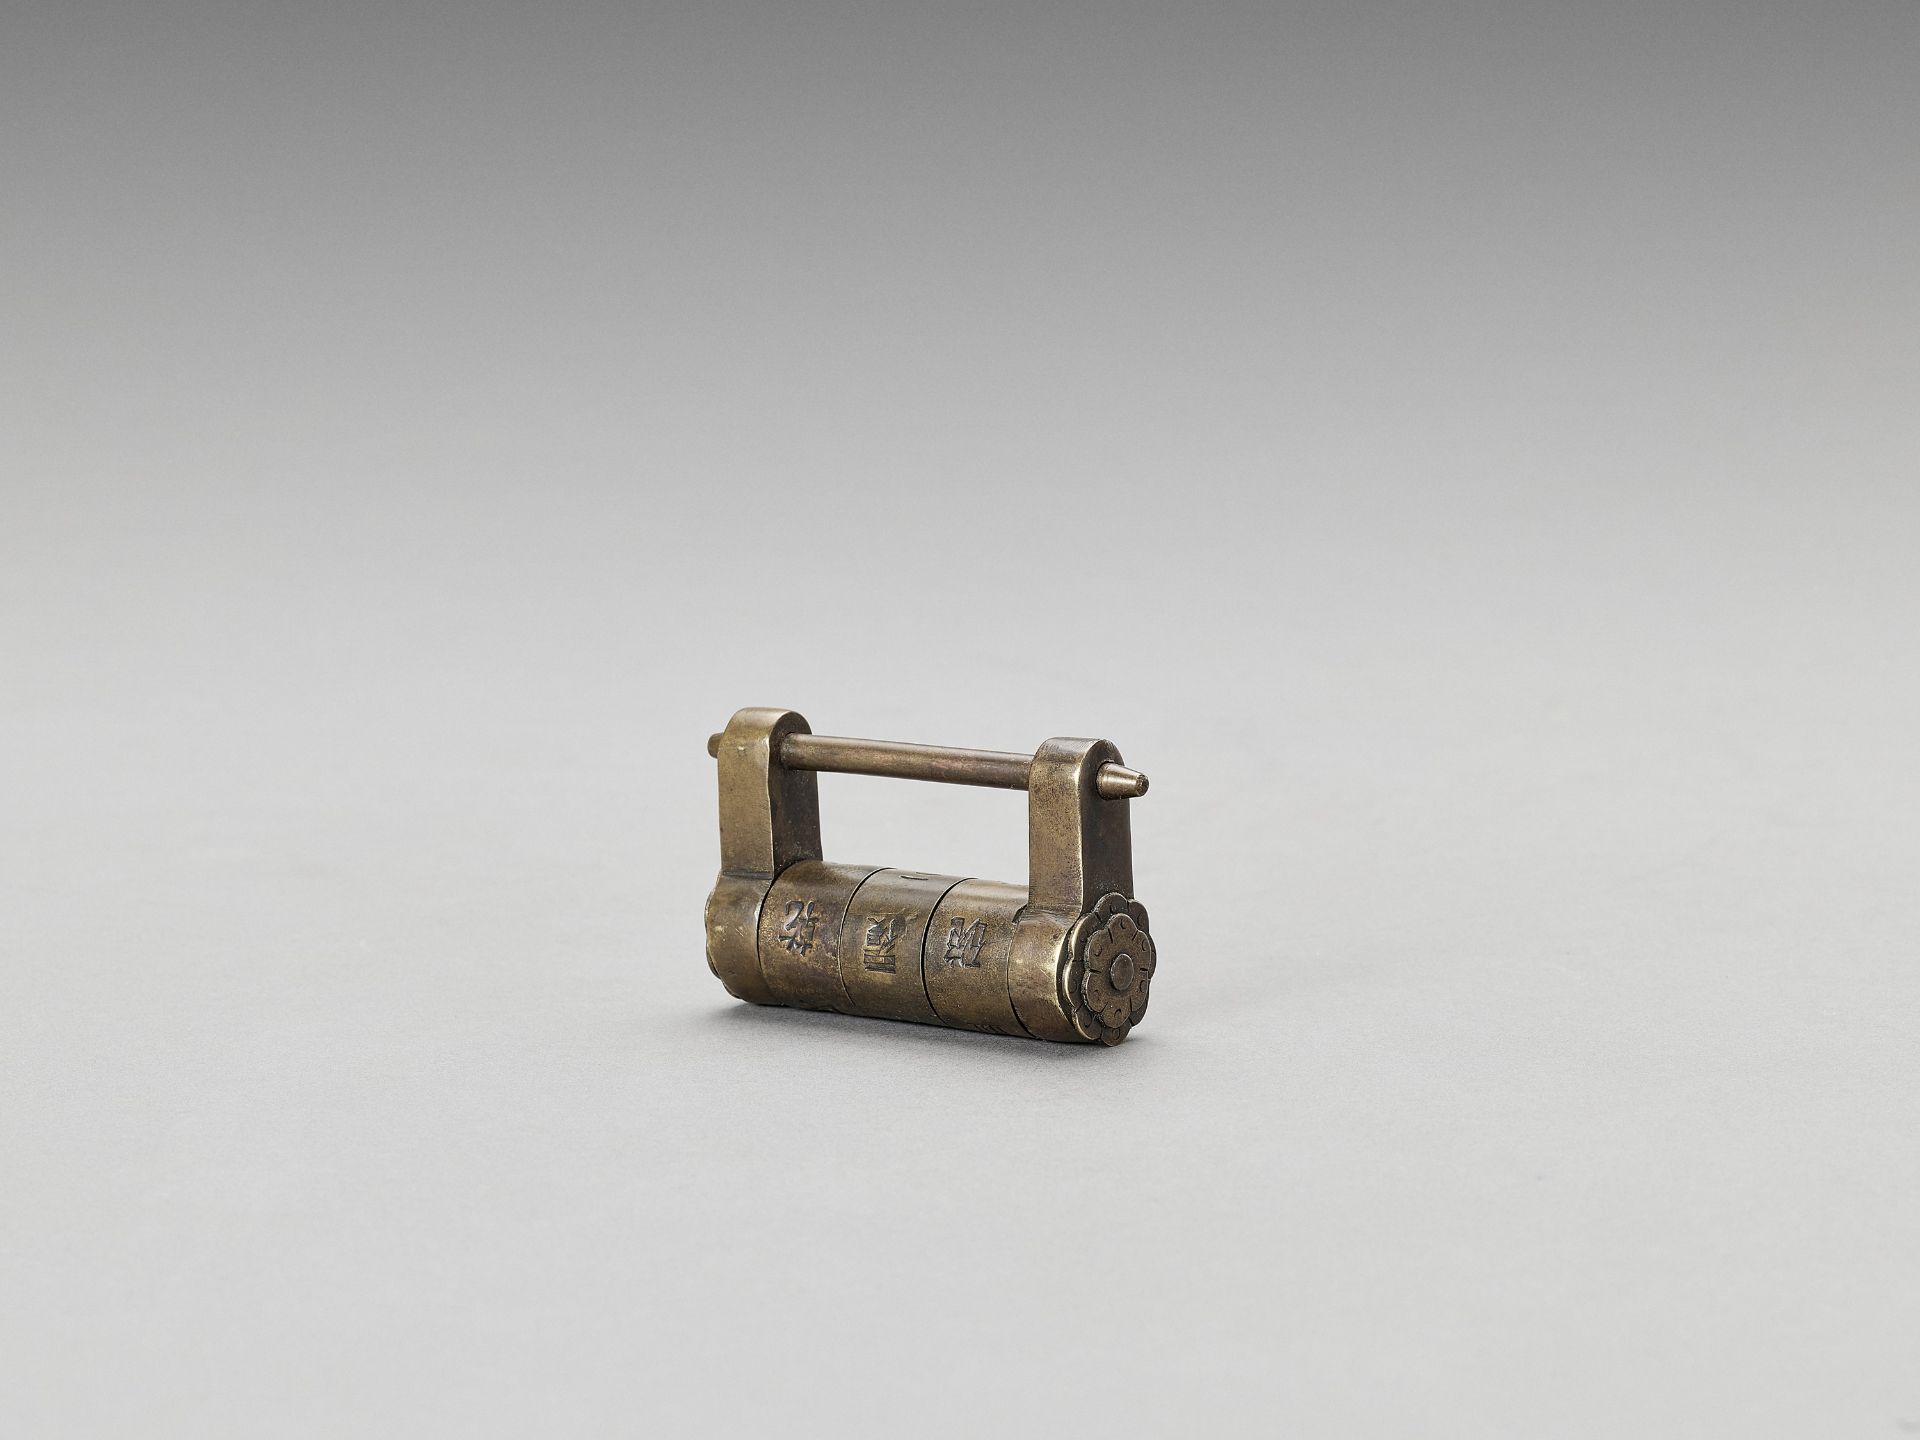 A FULLY FUNCTIONING CHINESE BRASS PADLOCK - Image 3 of 6